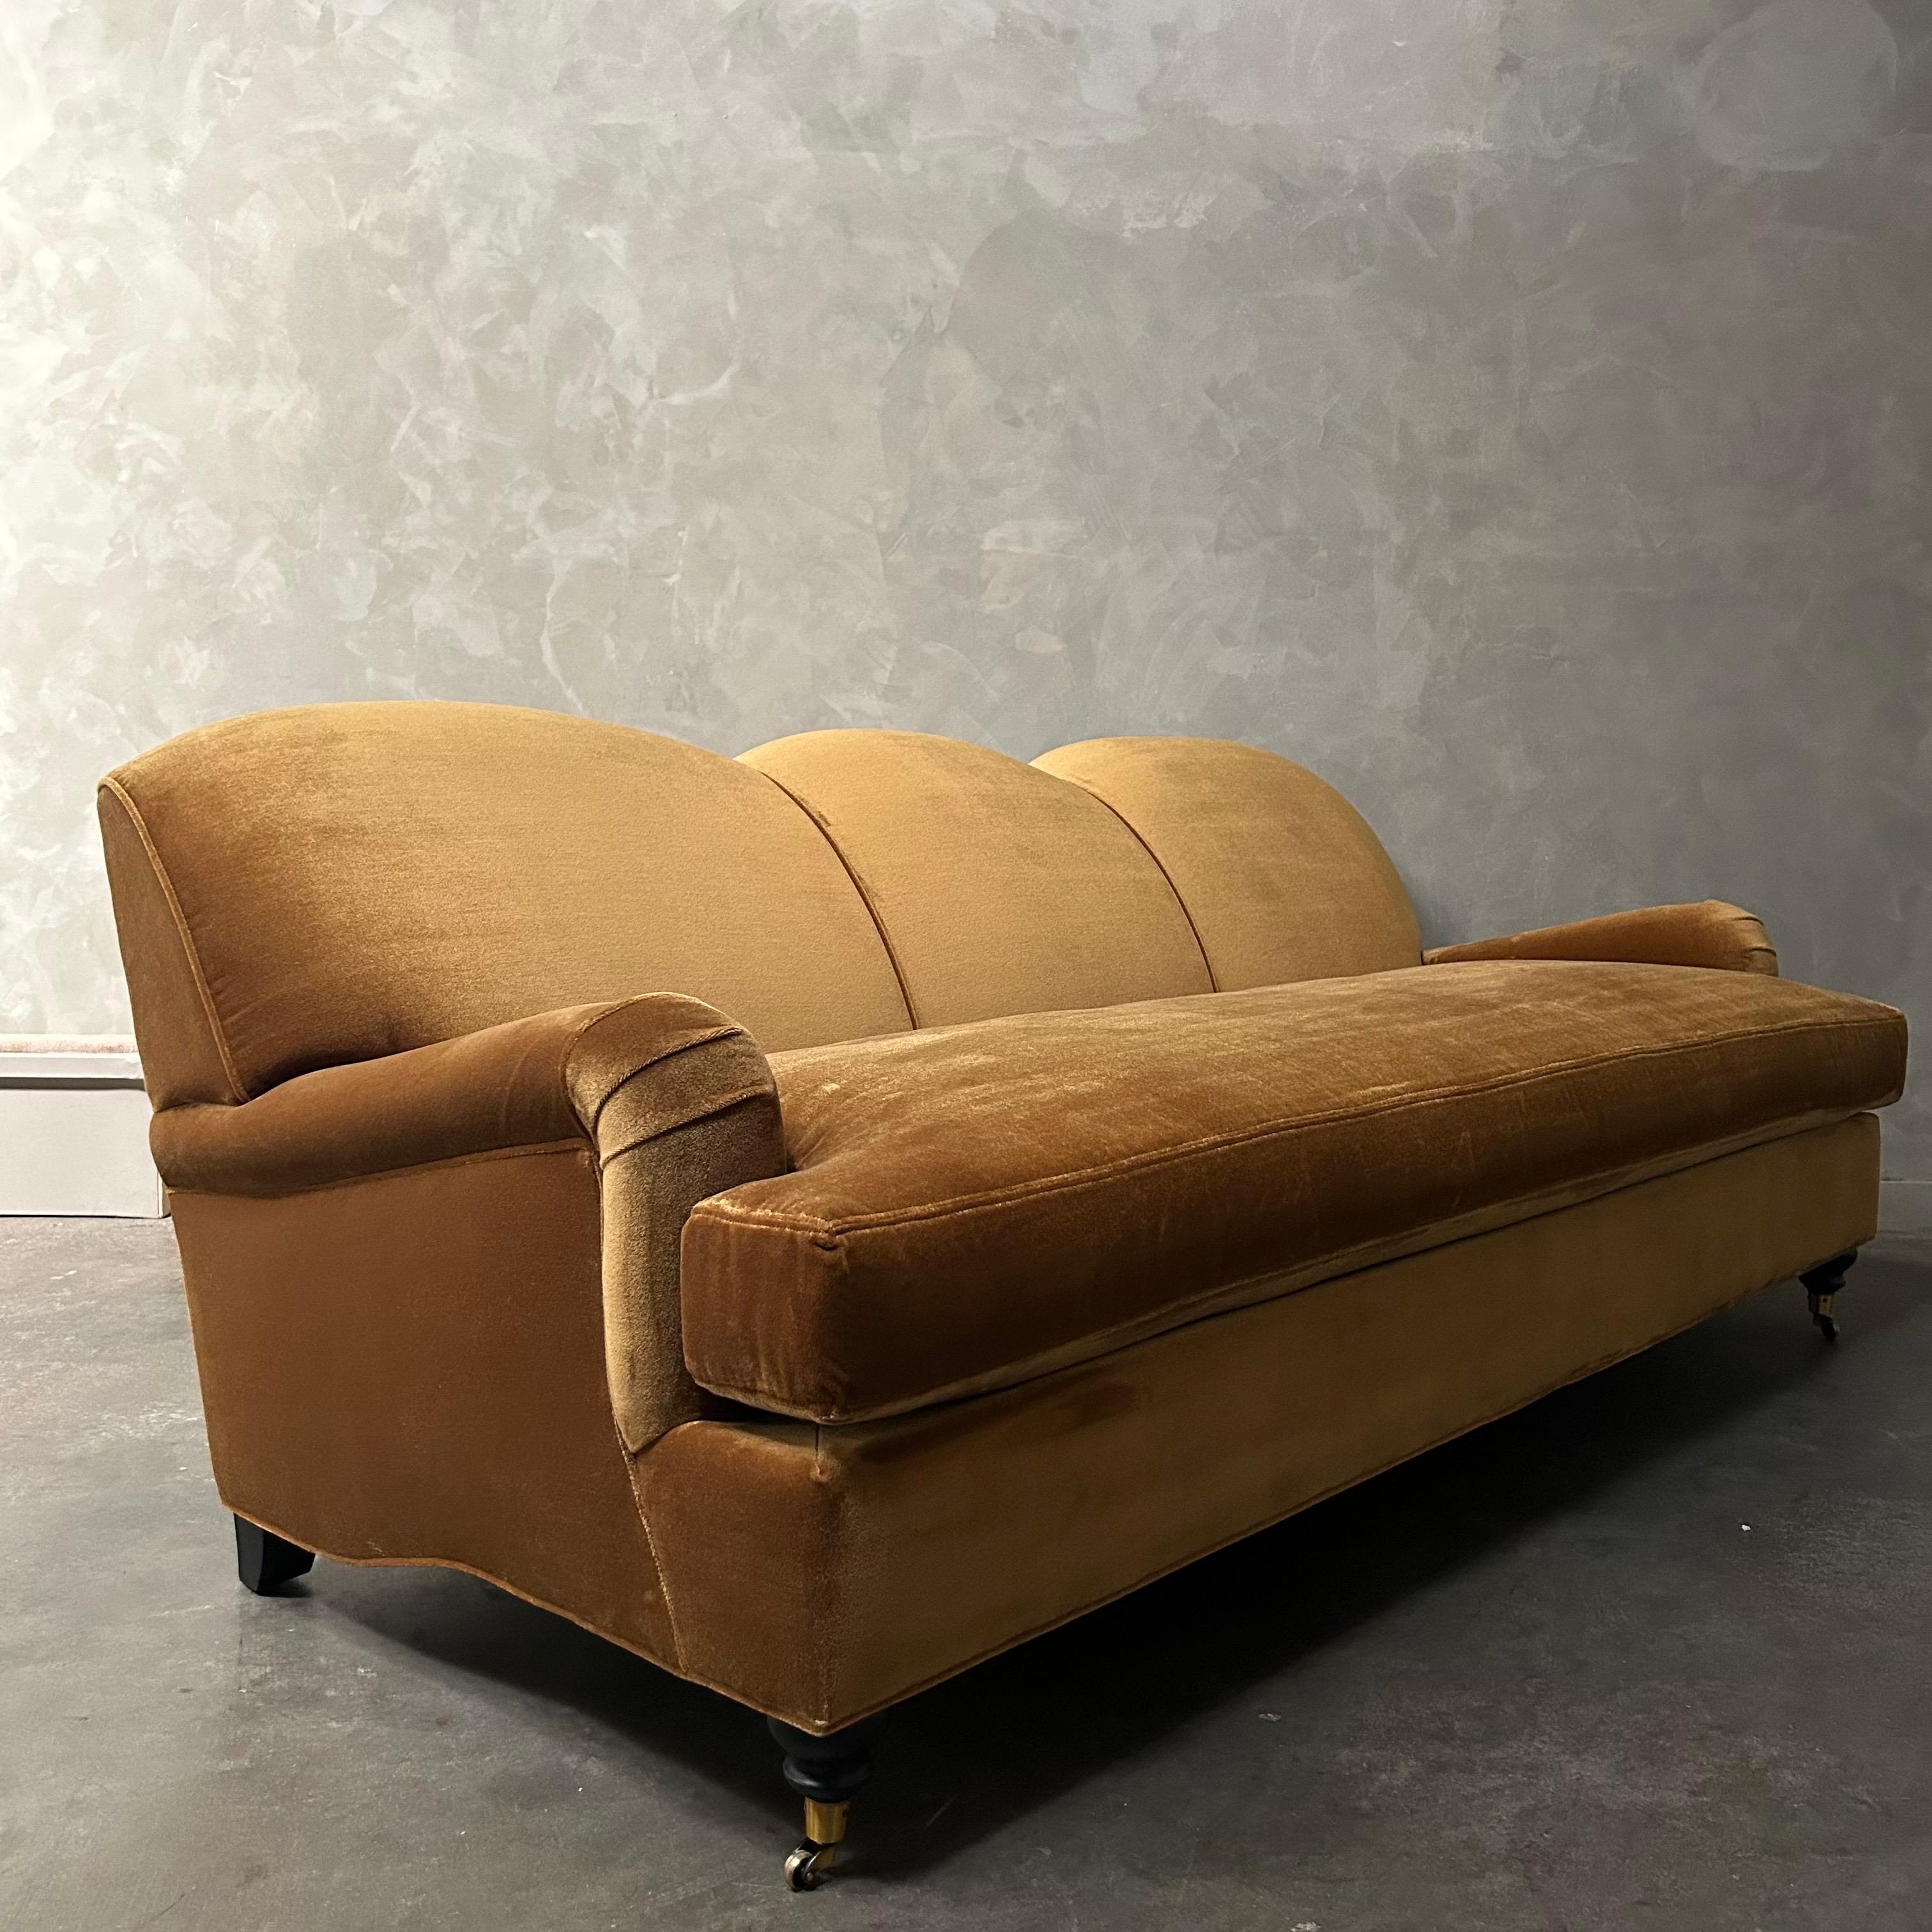 This beautiful english arm sofa has a modern twist, with its single bench cushion, and beautiful curved apron sides. It’s upholstered in a natural luxurious velvet , with down cloud cushions. Hardwood frame, no sag, HR foam, cotton, and poly fill.